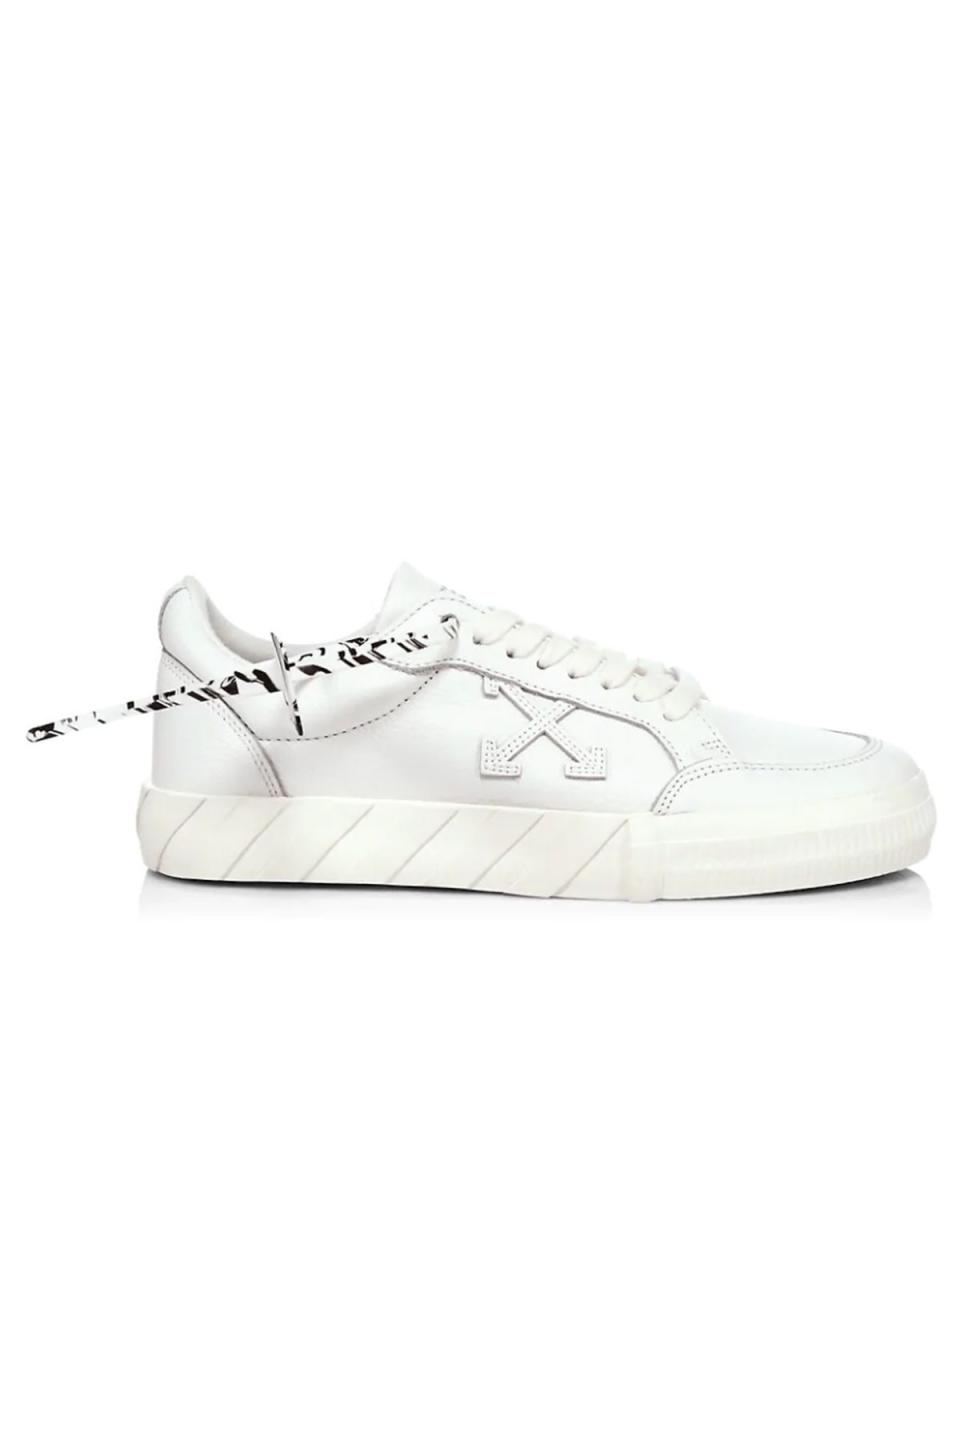 15) Low Vulcanized Leather Sneakers